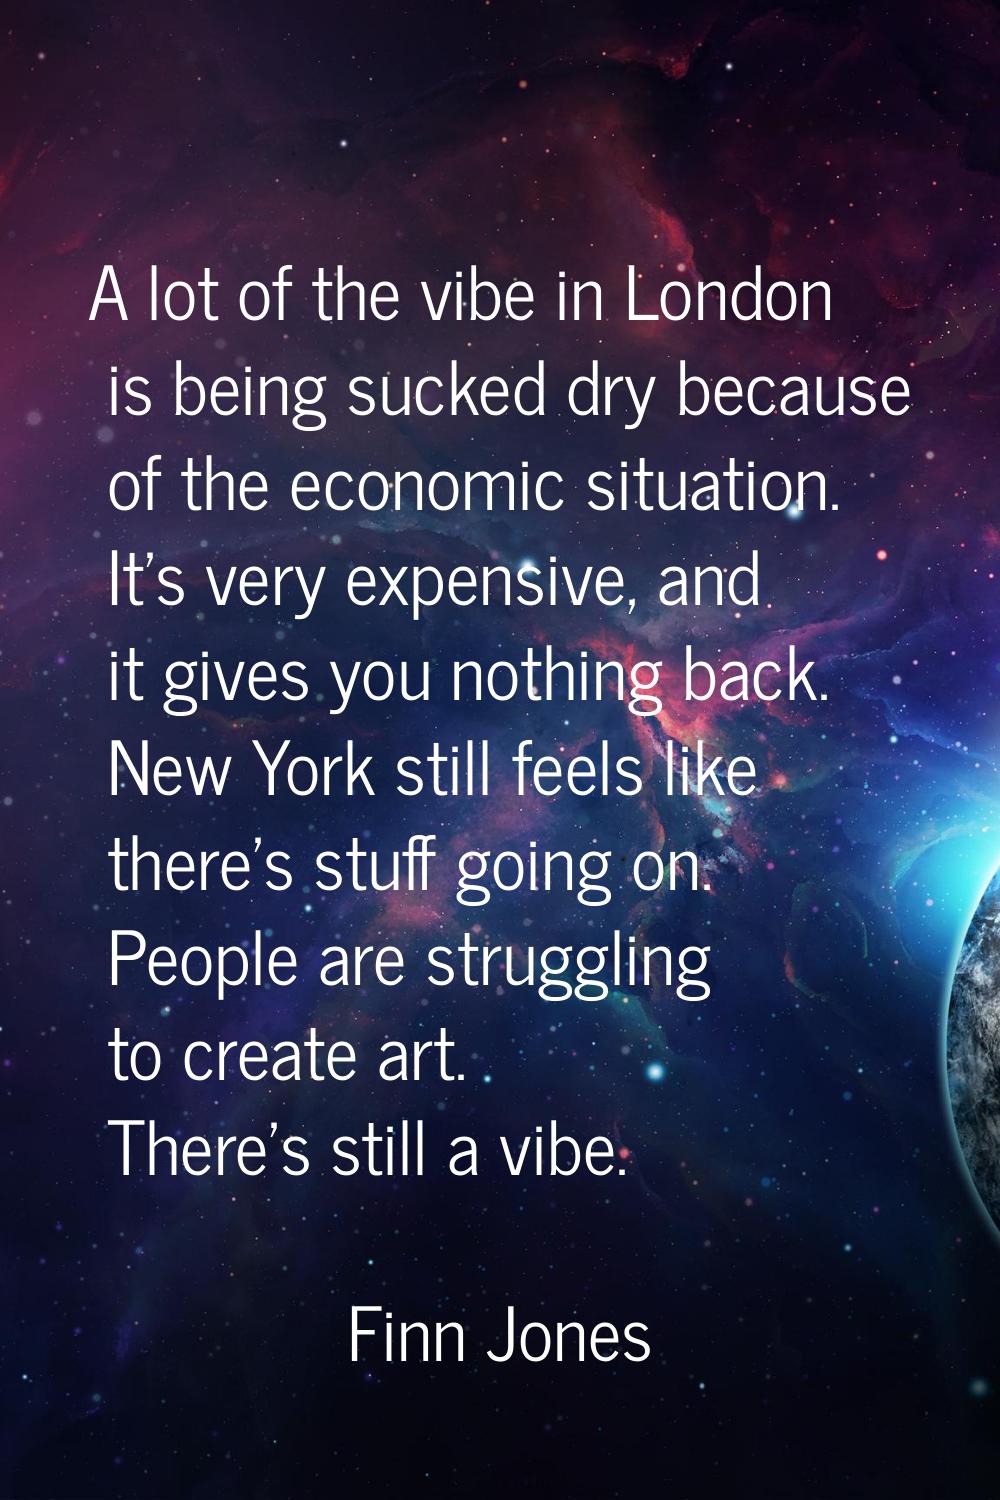 A lot of the vibe in London is being sucked dry because of the economic situation. It's very expens